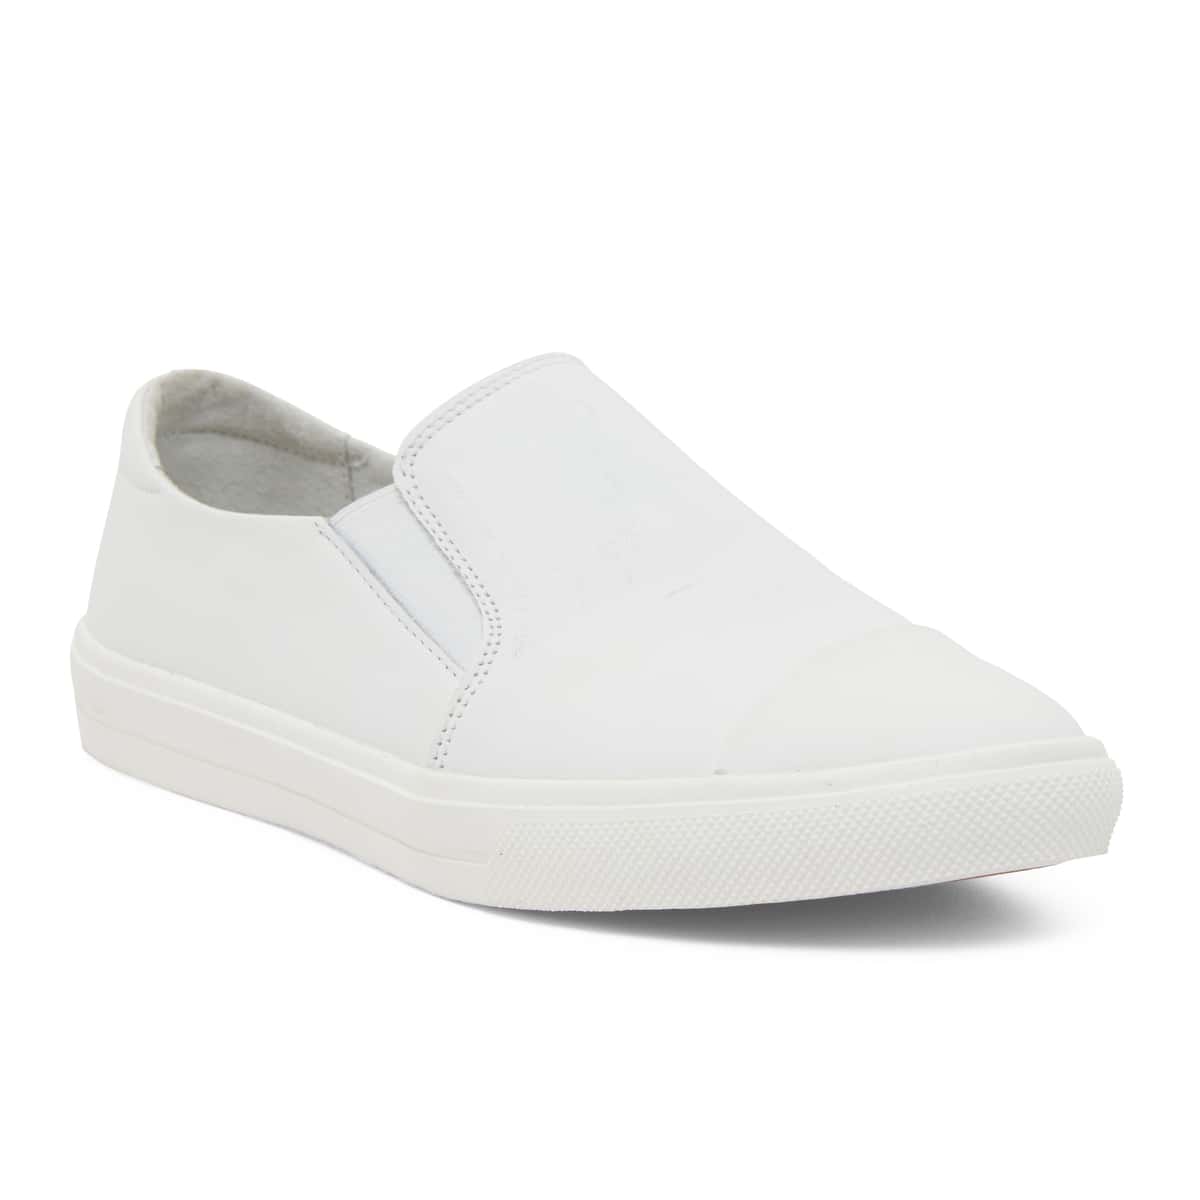 Tandem Sneaker in White Leather